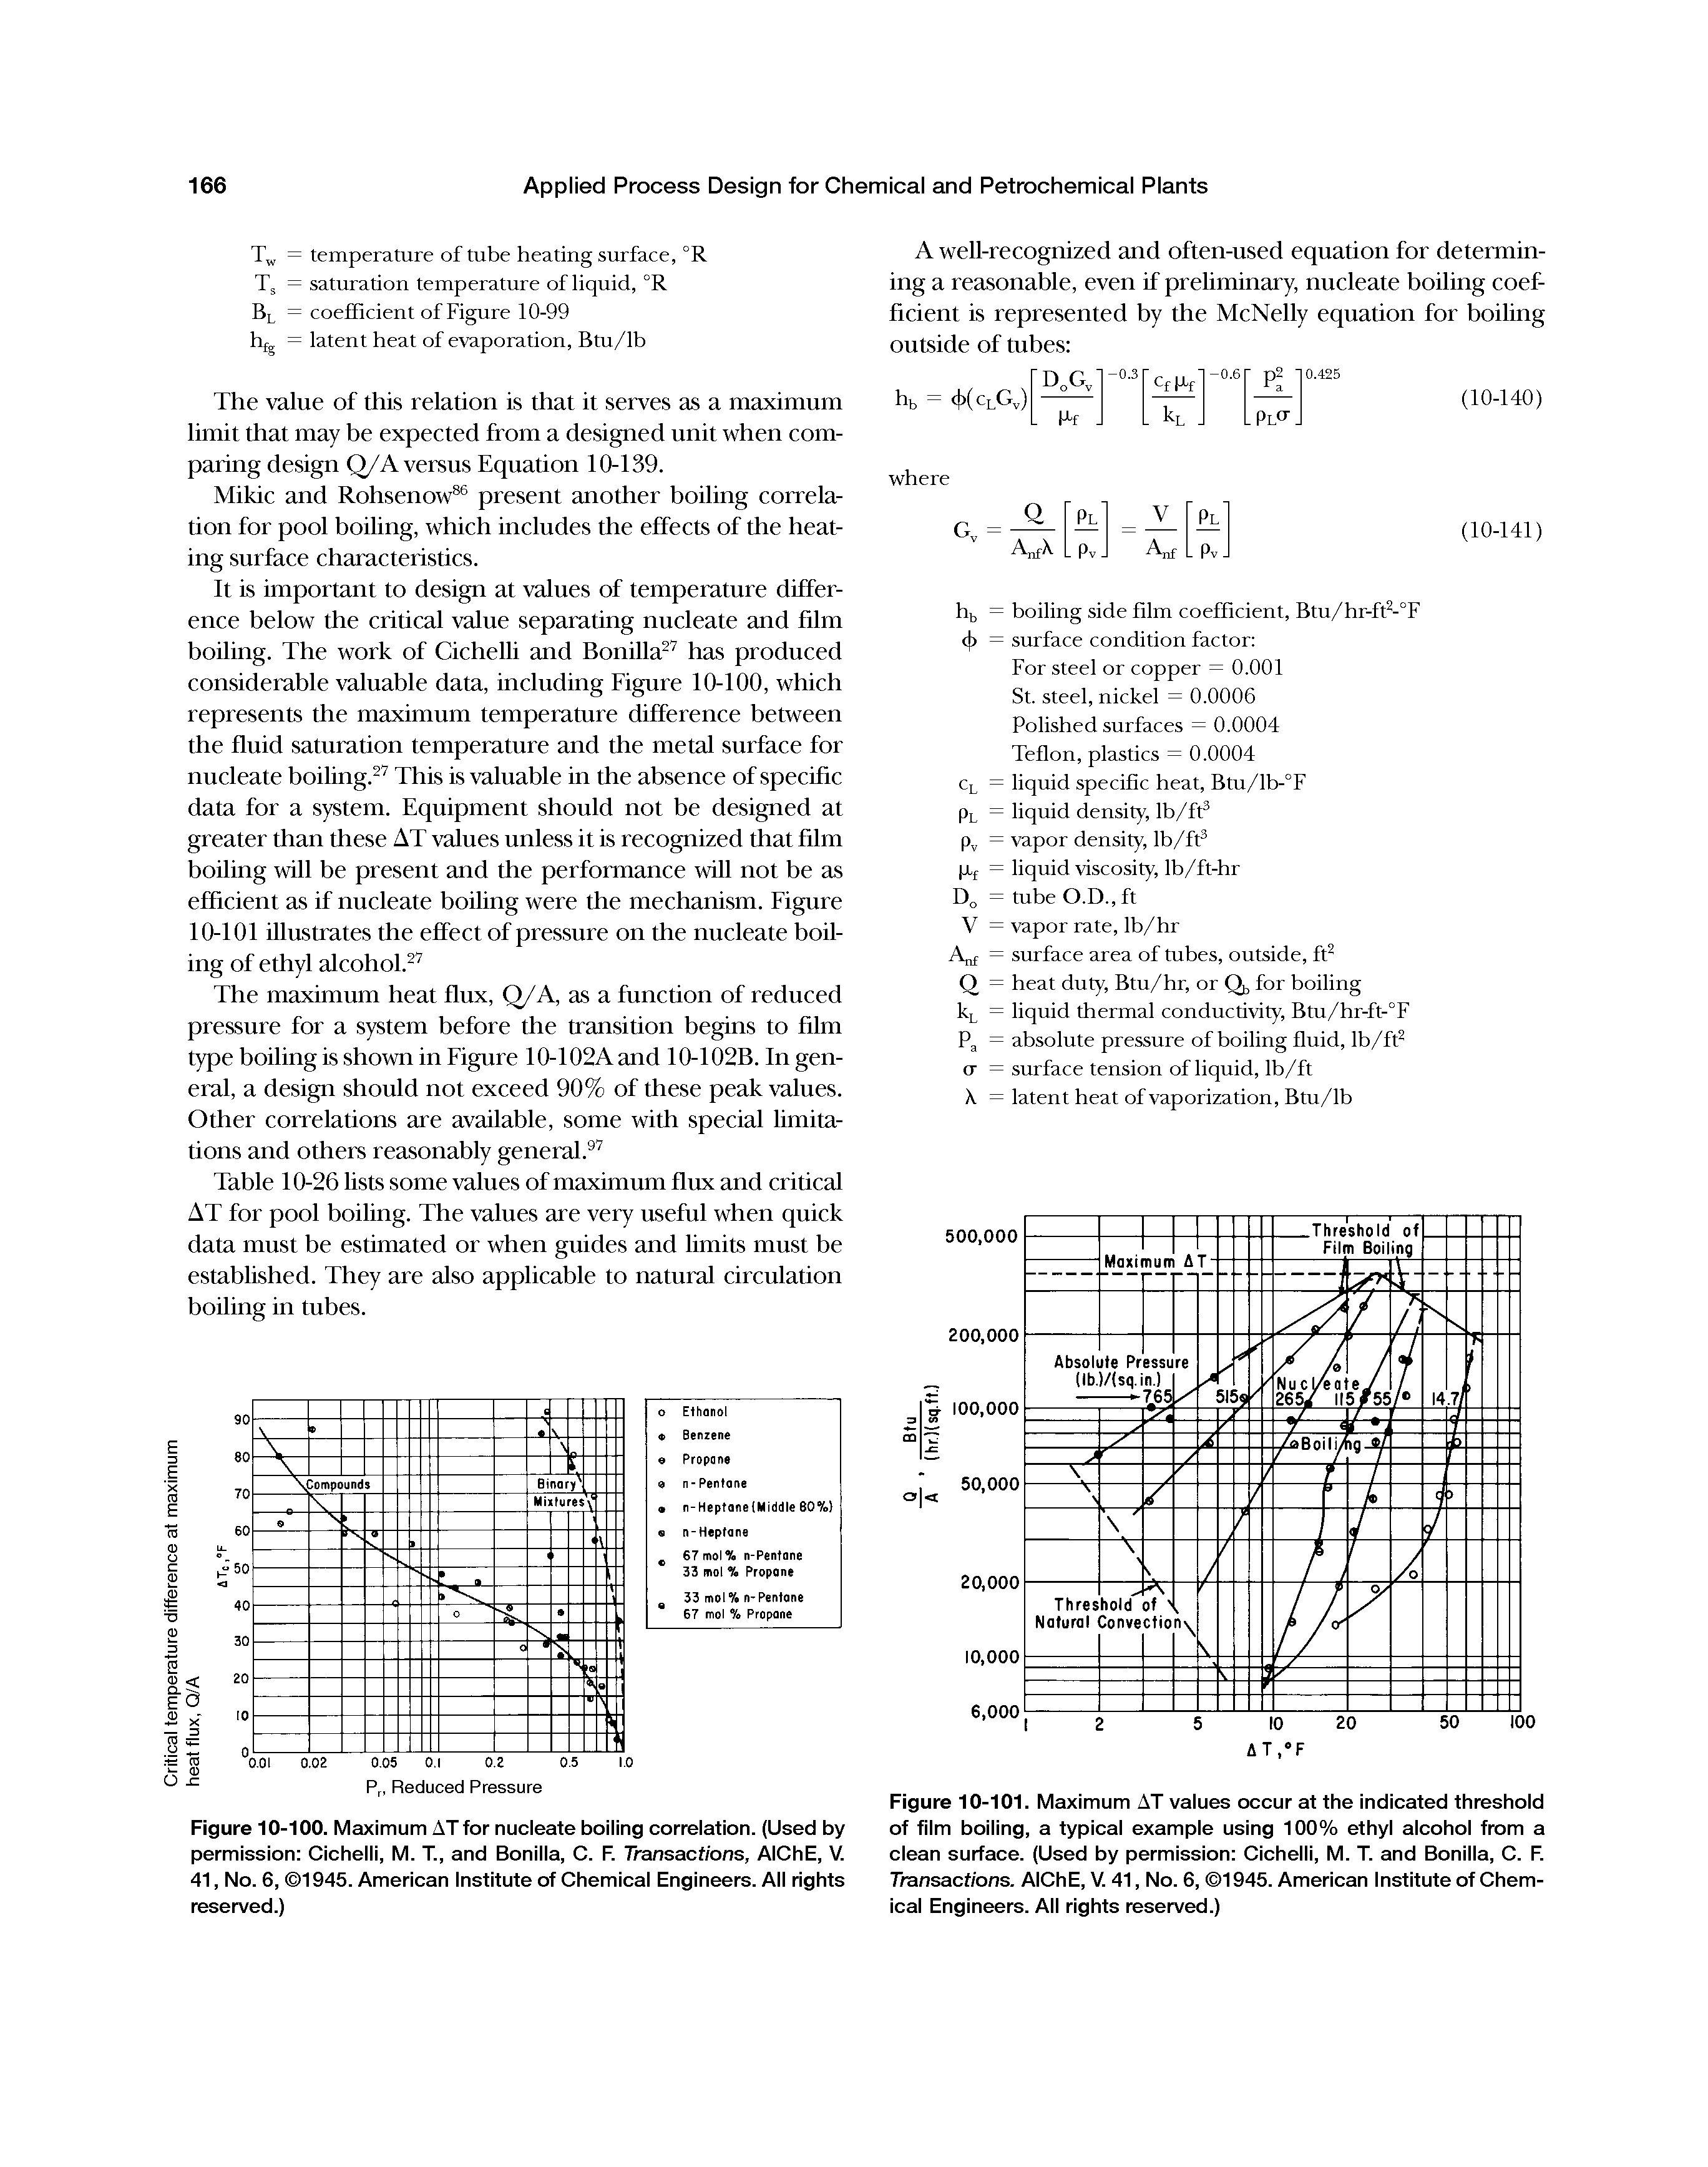 Figure 10-100. Maximum AT for nucleate boiling correlation. (Used by permission Cichelli, M. T, and Bonilla, C. F. Transactions, AlChE, V. 41, No. 6, 1945. American Institute of Chemical Engineers. All rights reserved.)...